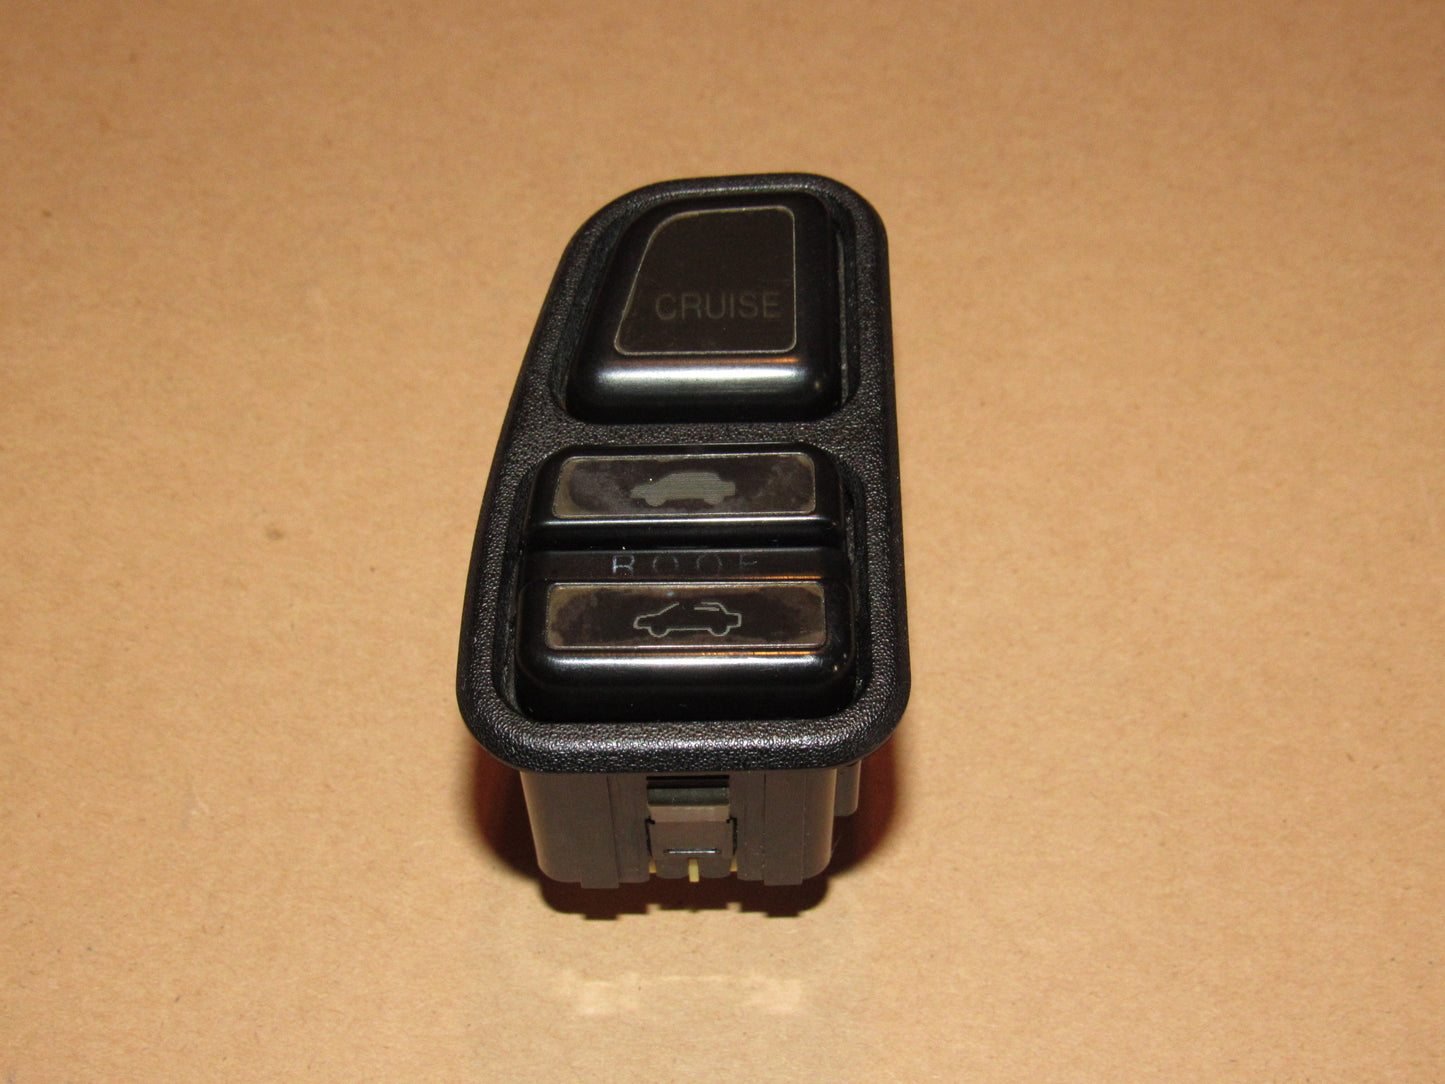 90-91 Honda Prelude OEM Sunroof and Cruise Control Switch